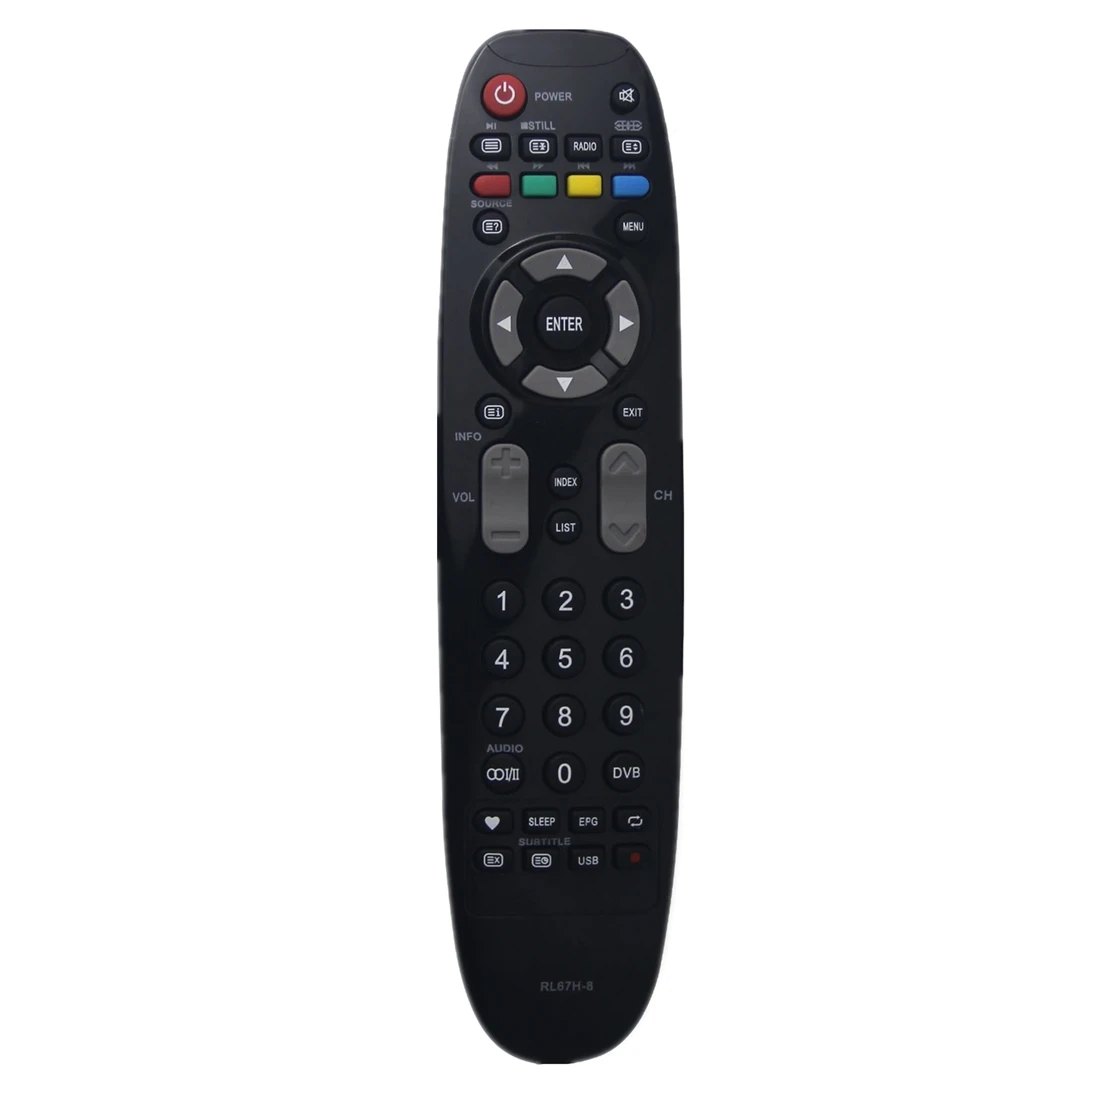 RL67H-8 TV Remote Control for Changhong TV TV20A-C35 SABA LC32HA3 LED50C2000H LED50C2000IS LED29B1000S